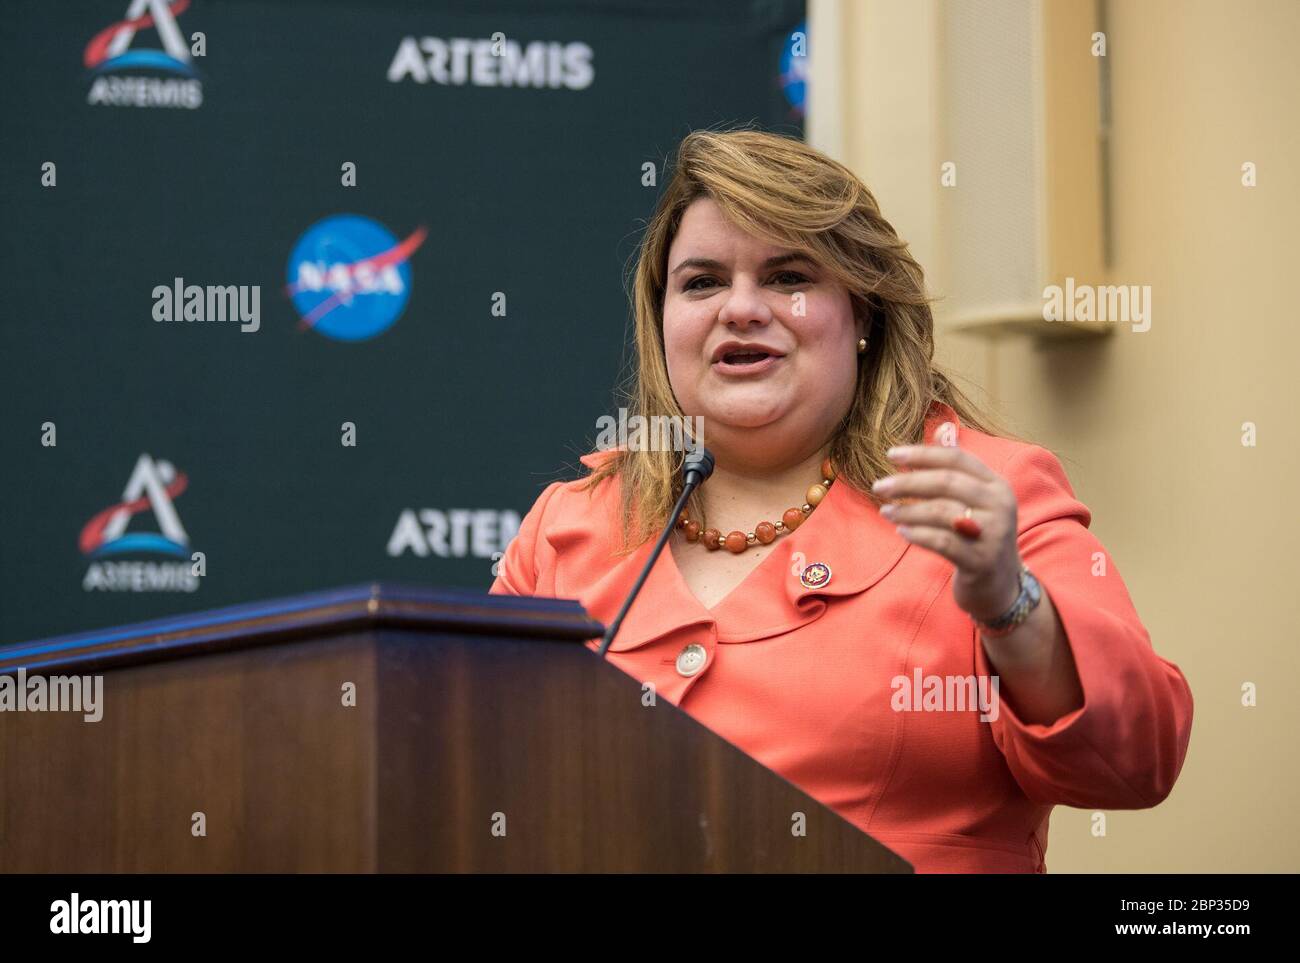 Women's Caucus Event on Artemis  Resident Commissioner of Puerto Rico, Jenniffer González-Colón, R-Puerto Rico, provides welcoming remarks at a bipartisan Congressional Caucus for Women’s Issues briefing on NASA’s Artemis lunar exploration program, Wednesday, September 11, 2019 at the Rayburn House Office Building in Washington. Stock Photo